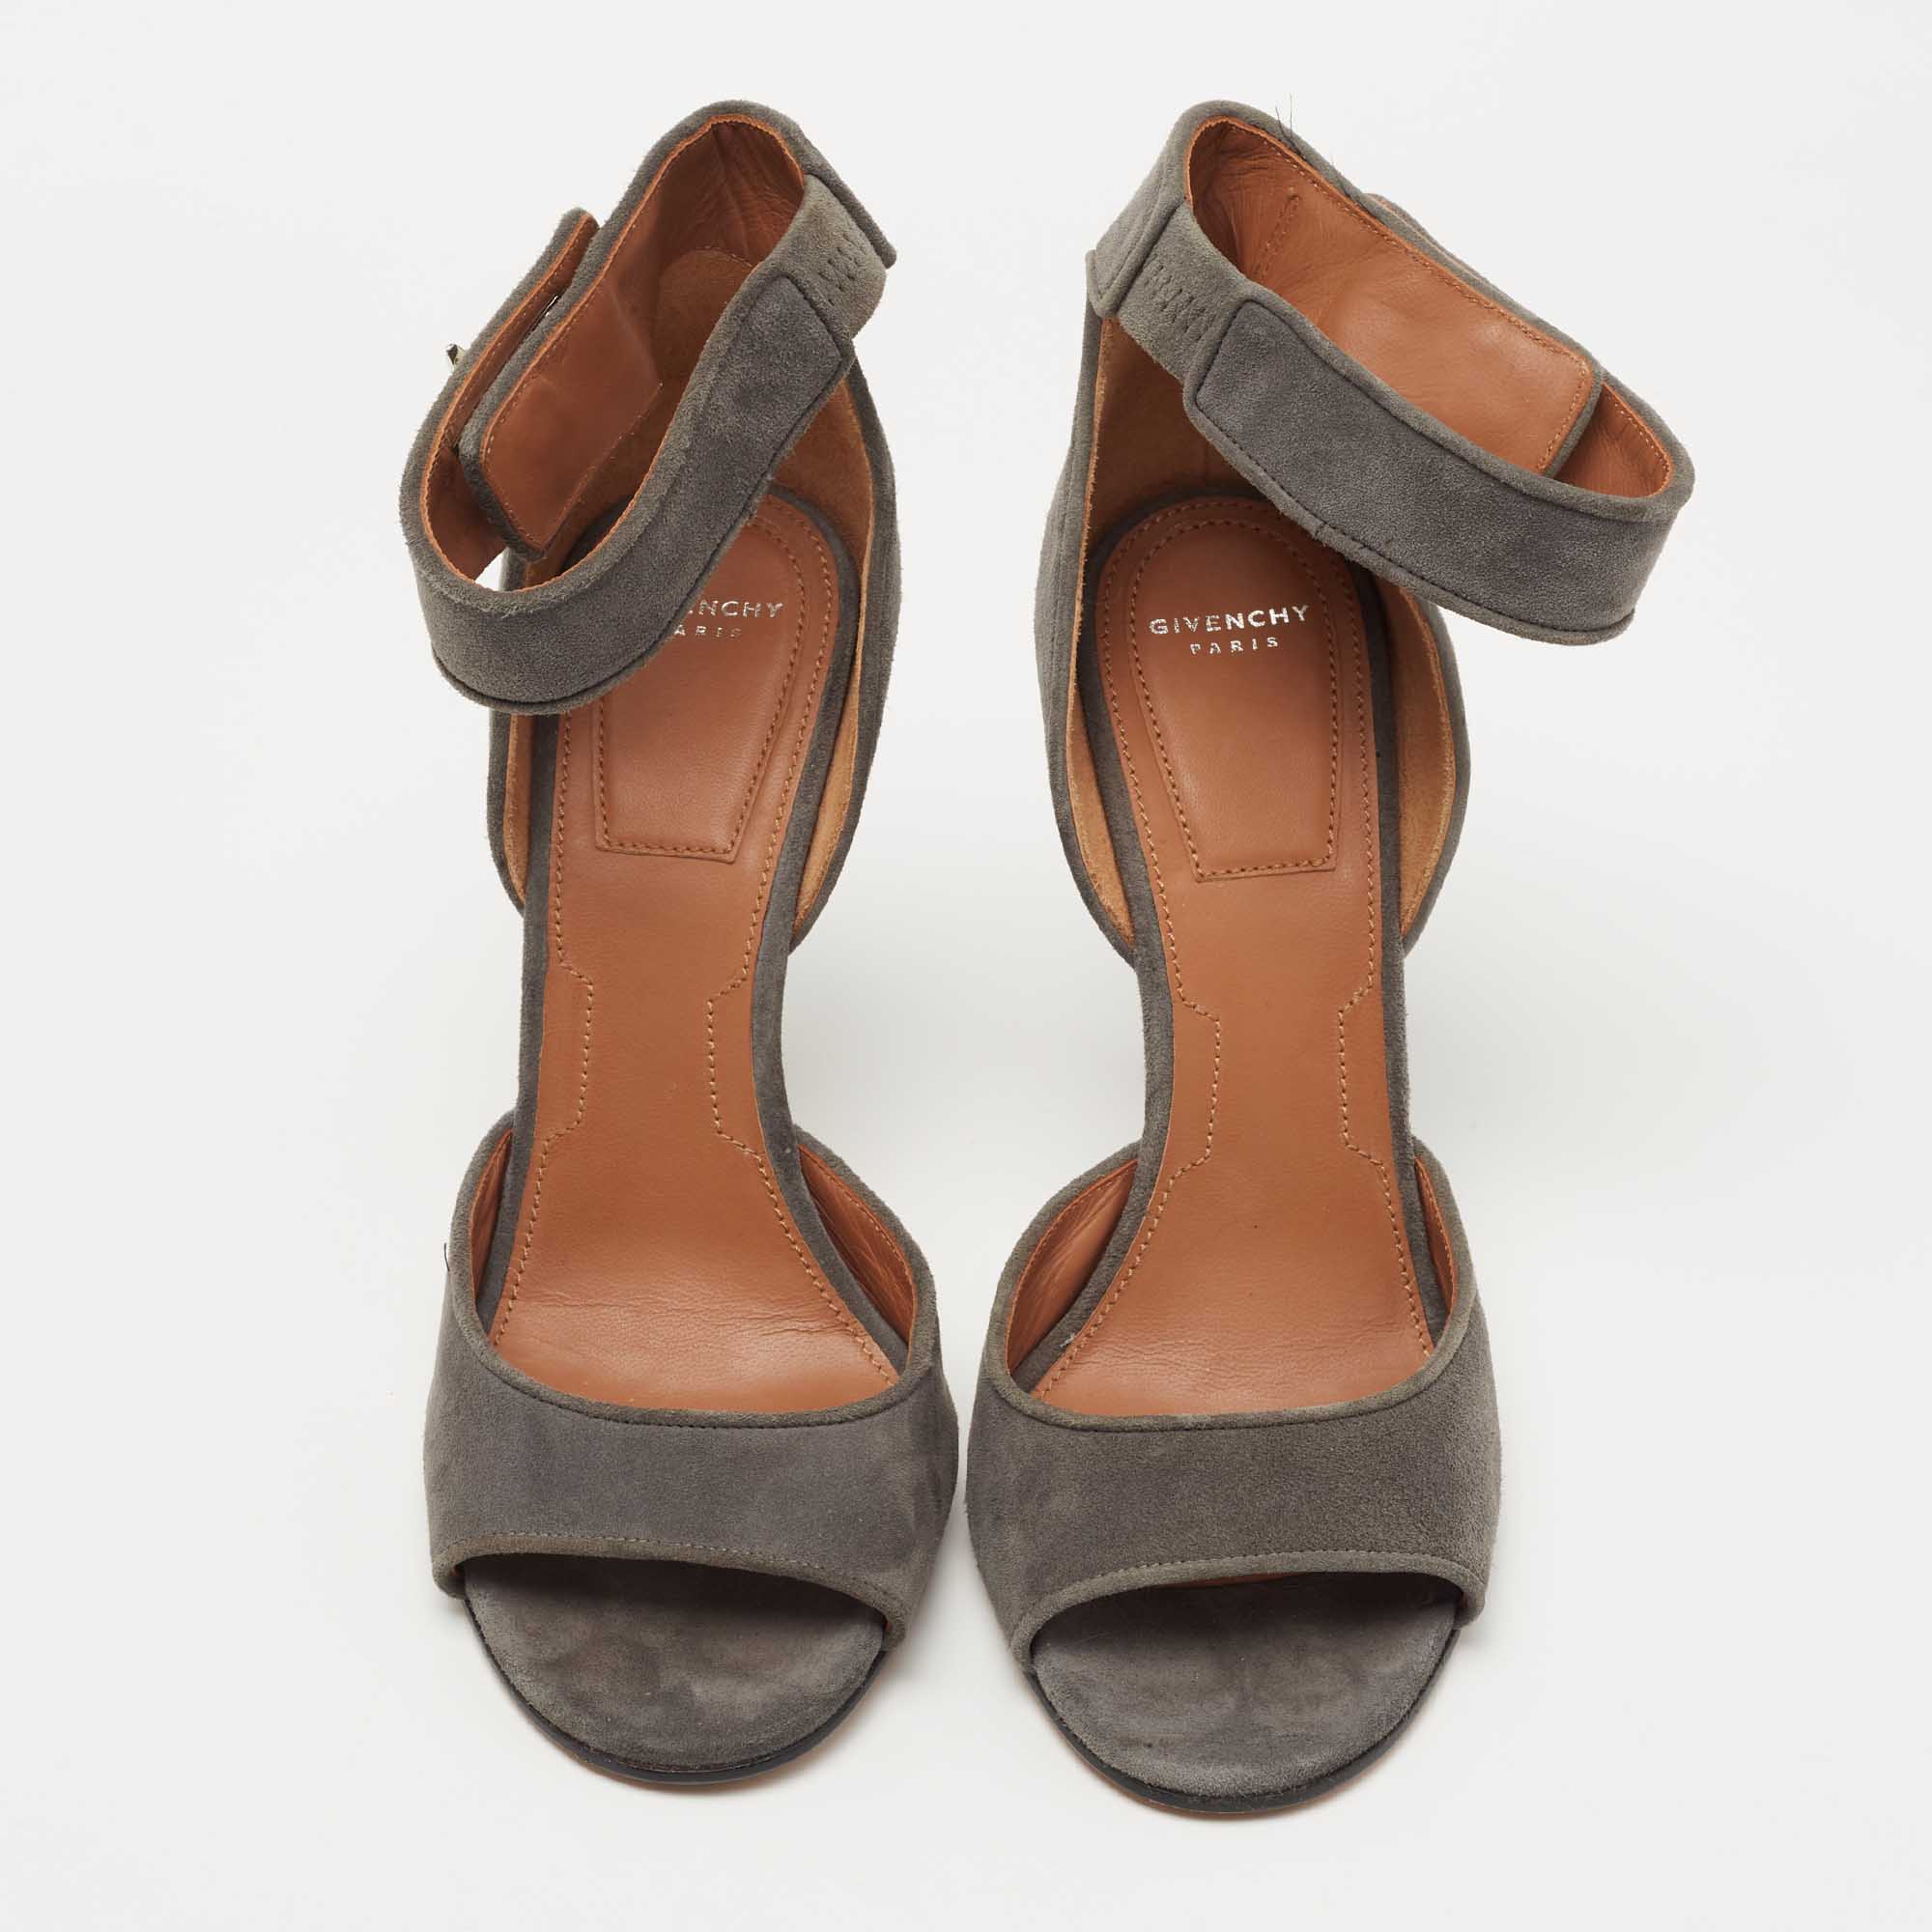 Givenchy Grey Suede Shark Tooth Lock Ankle Strap Sandals Size 37.5